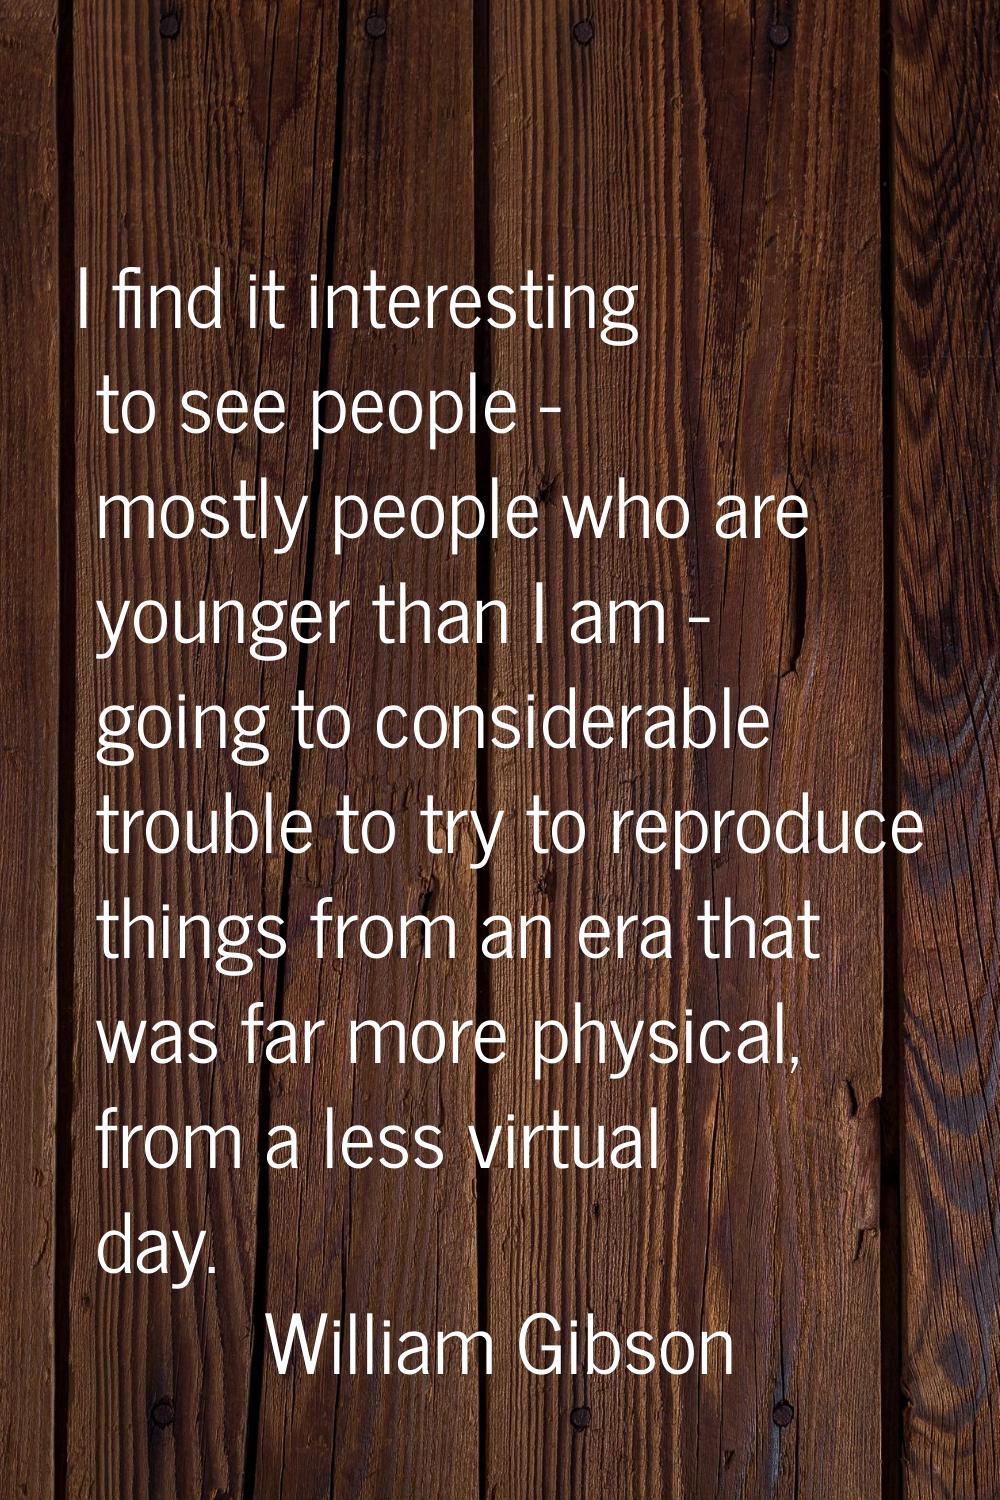 I find it interesting to see people - mostly people who are younger than I am - going to considerab